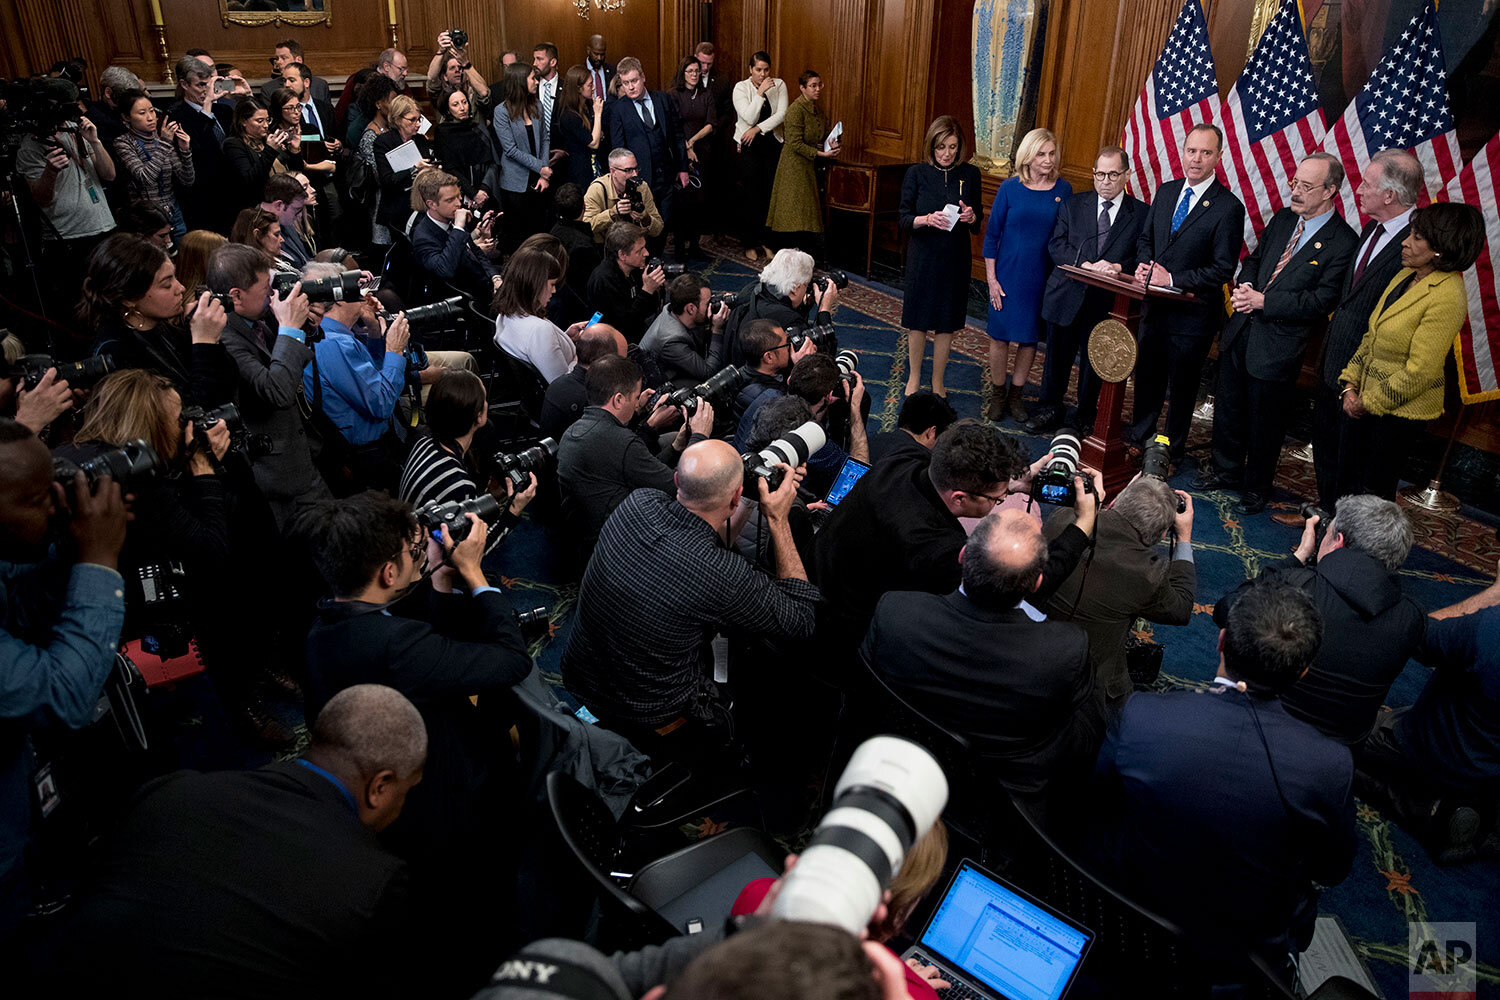  House Intelligence Committee Chairman Adam Schiff, D-Calif., fourth from right, accompanied by from left, House Speaker Nancy Pelosi of Calif., House Committee on Oversight and Reform Chairwoman Carolyn Maloney, D-N.Y., House Judiciary Committee Cha